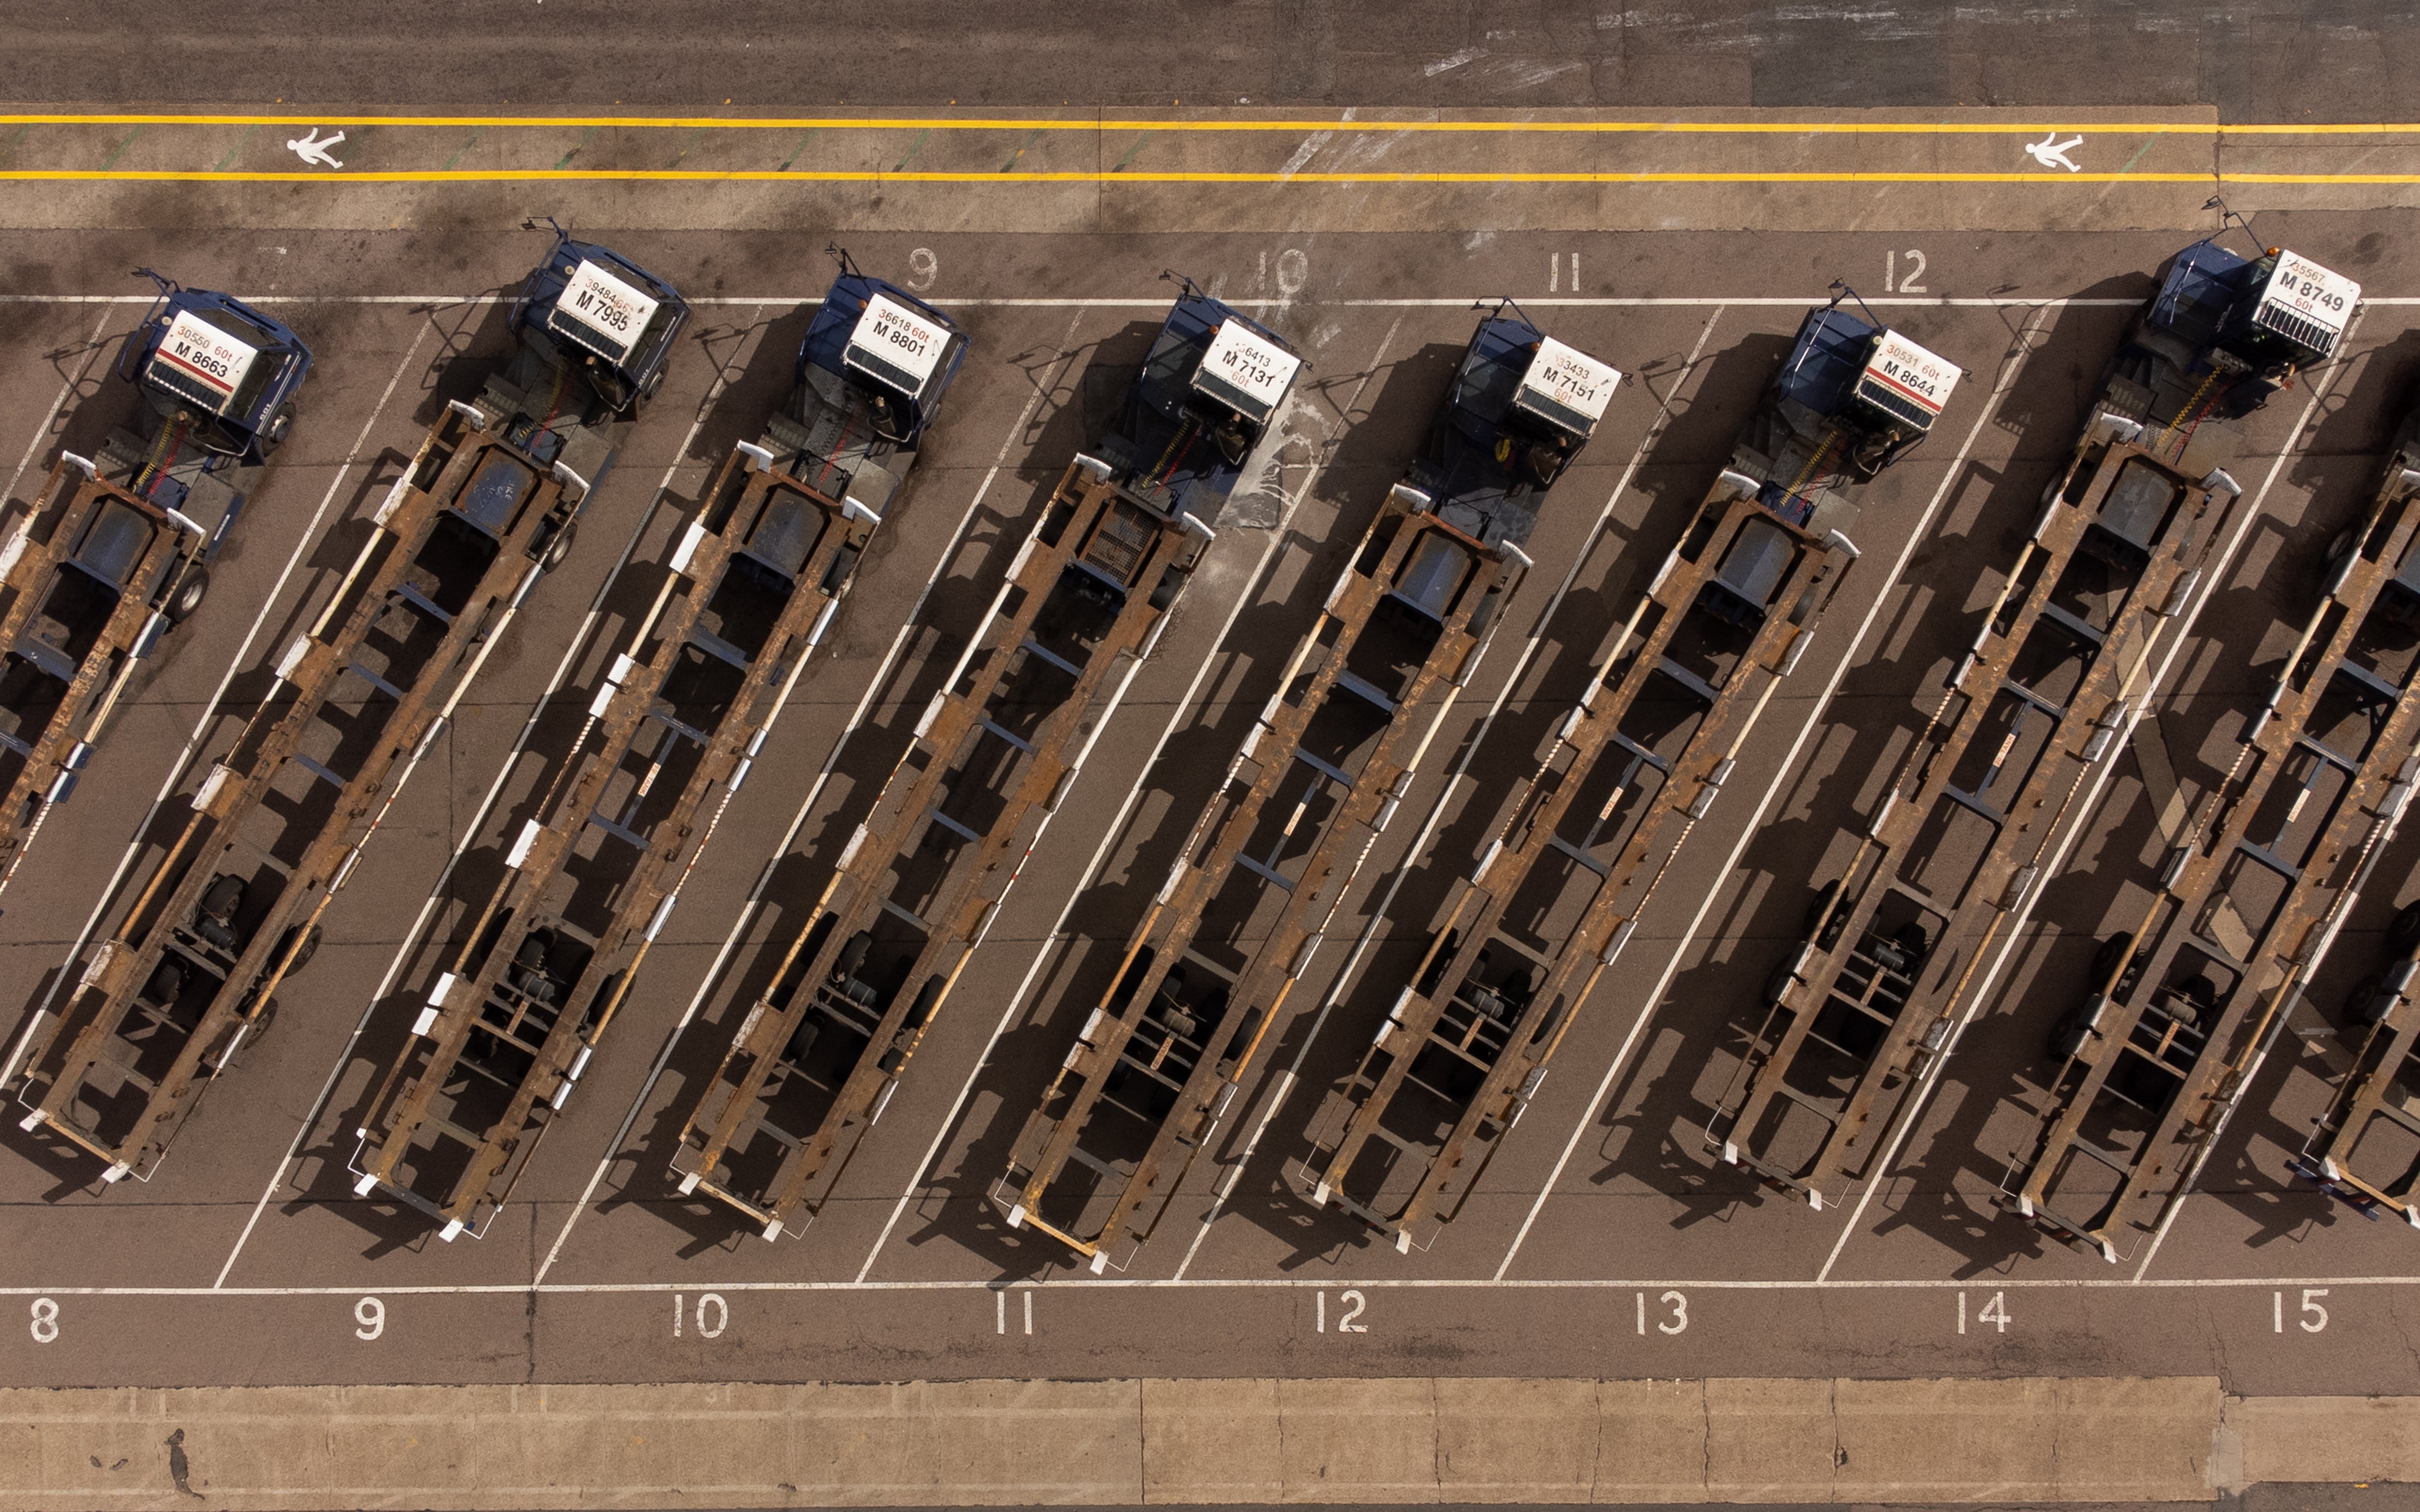 Shipping container transporters sit in the Port of Felixstowe in Suffolk, following a strike by members of the Unite union last month (Joe Giddens/PA)